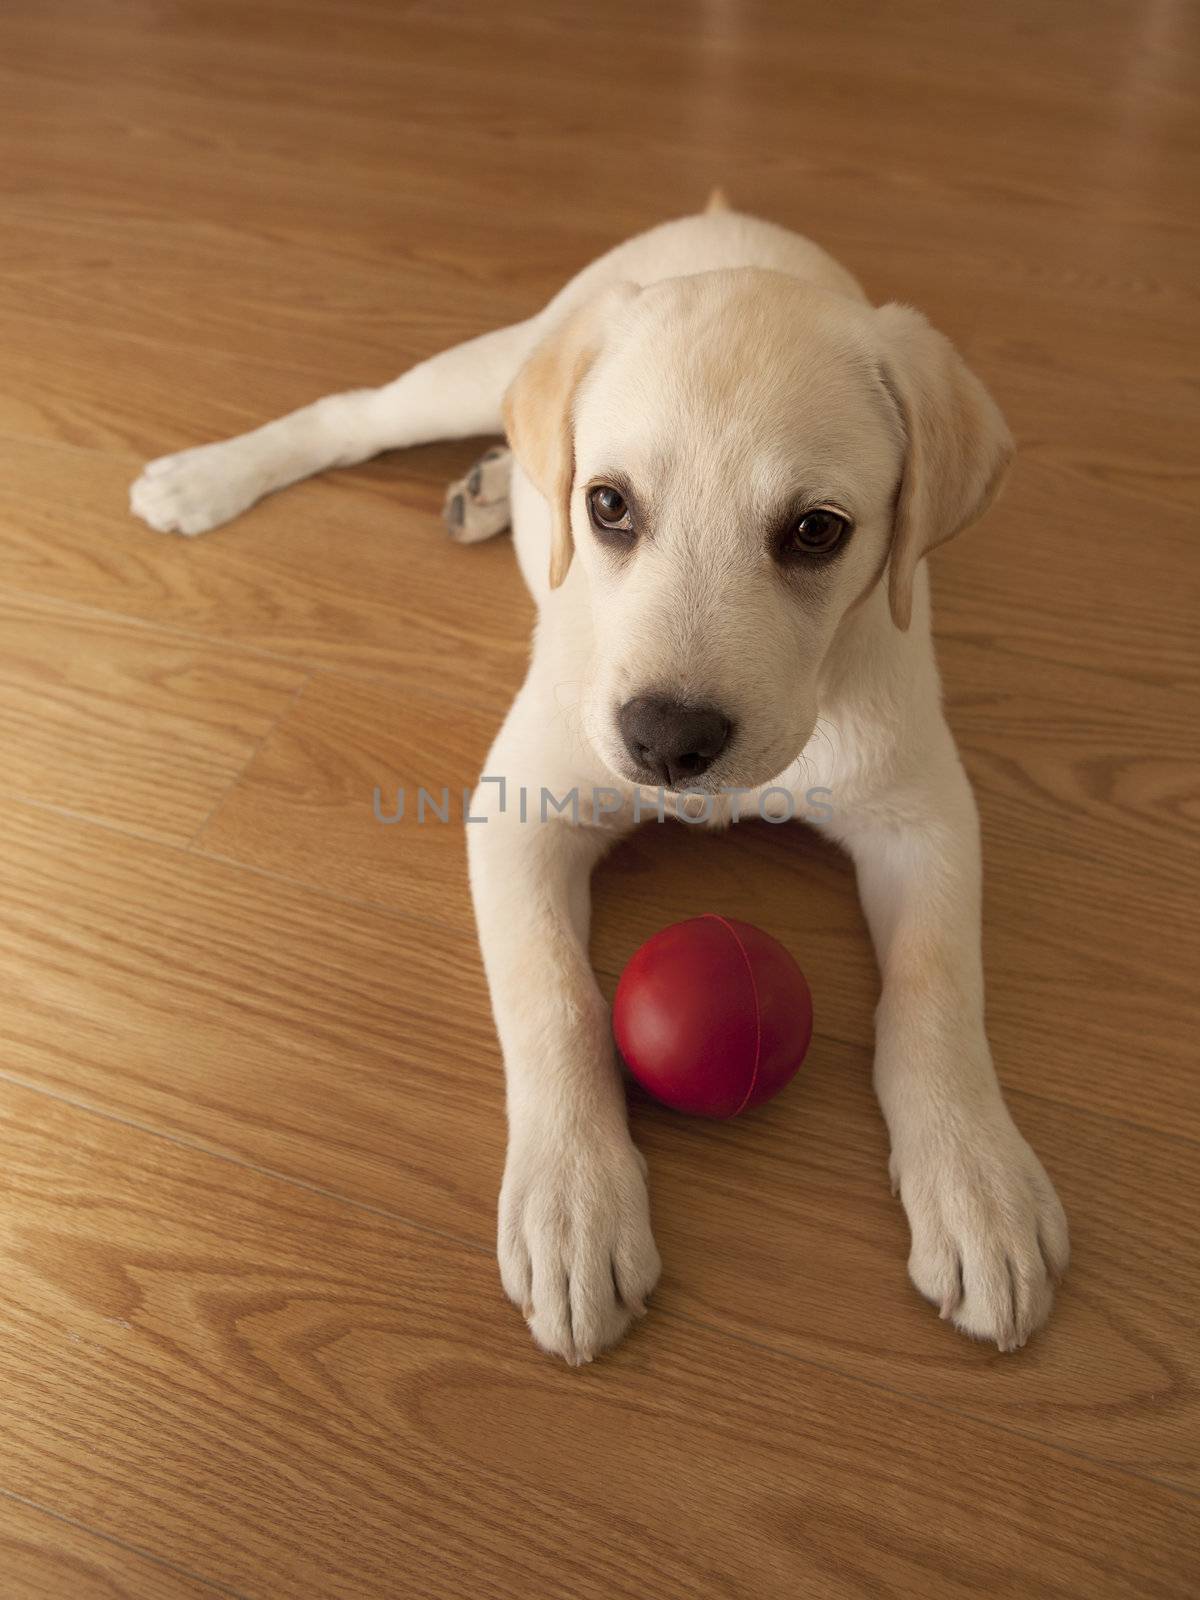 Labrador retriever puppy lying on the floor and playing with a red ball